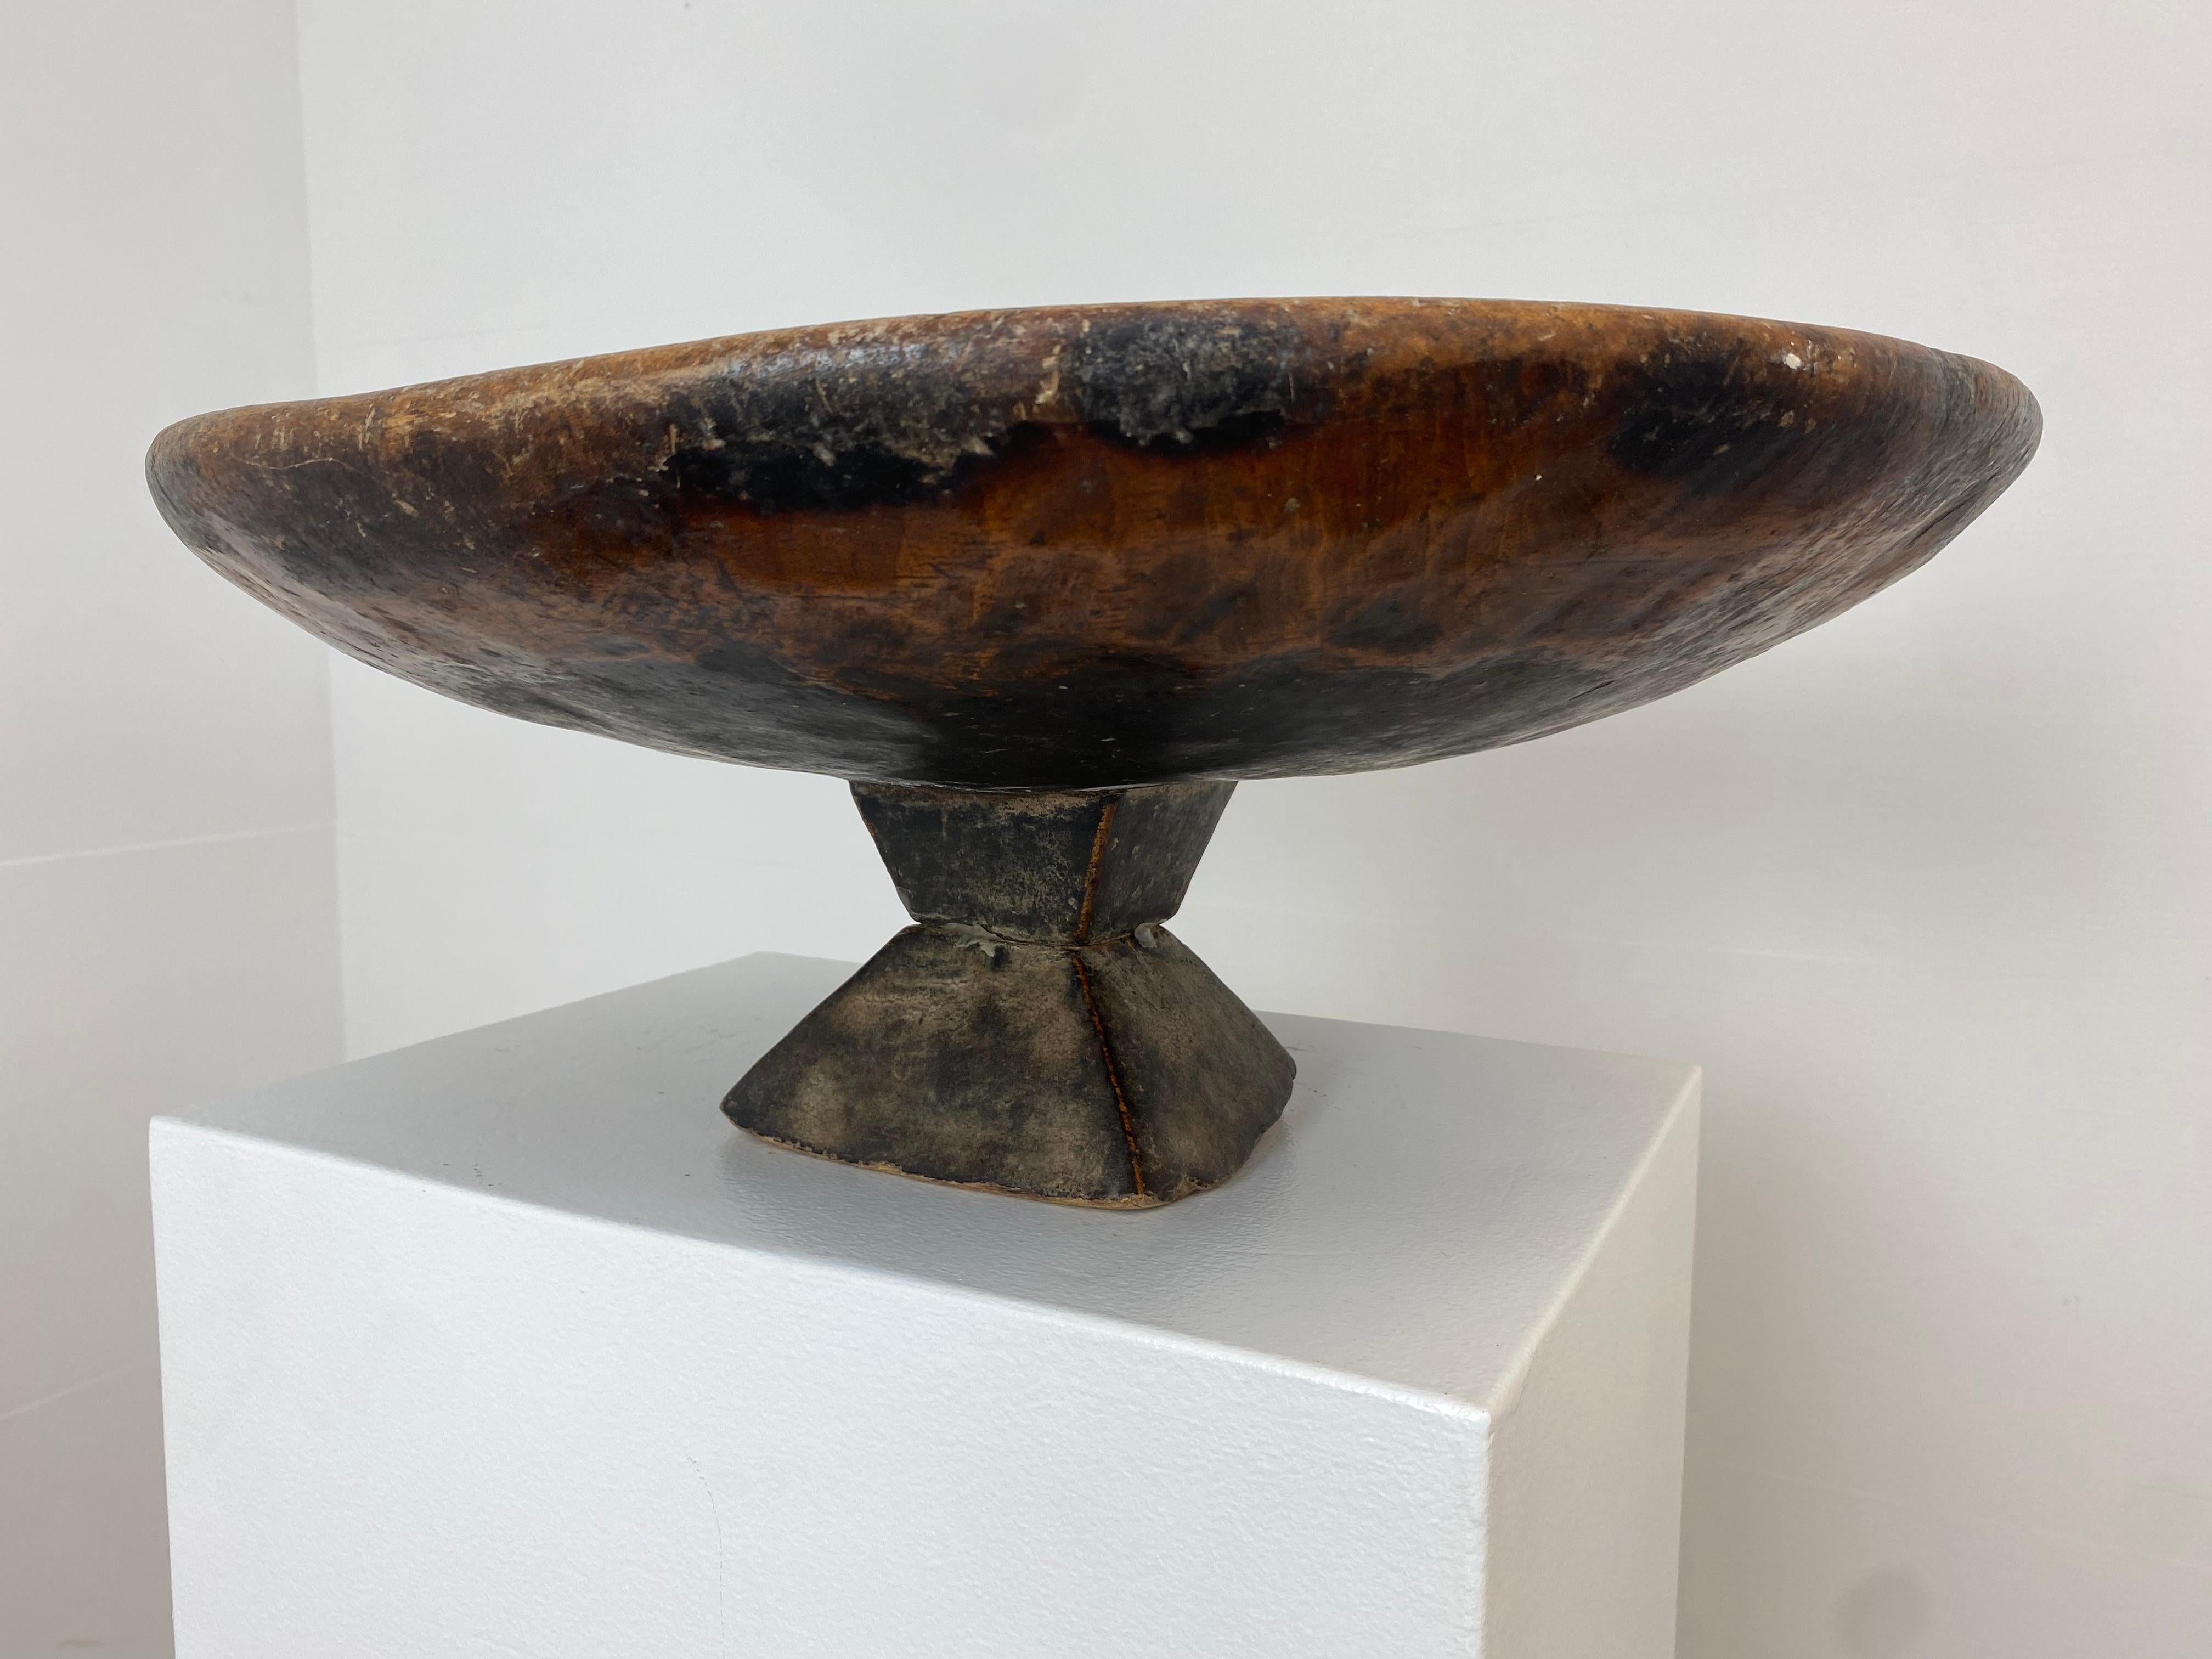 A large, antique Wooden Tazza From the South Of Morocco from around 1920,
superb old patina of the Wood and great, old Shine,
the tazza stands on a fine square foot,
very decorative item to be used for different purposes